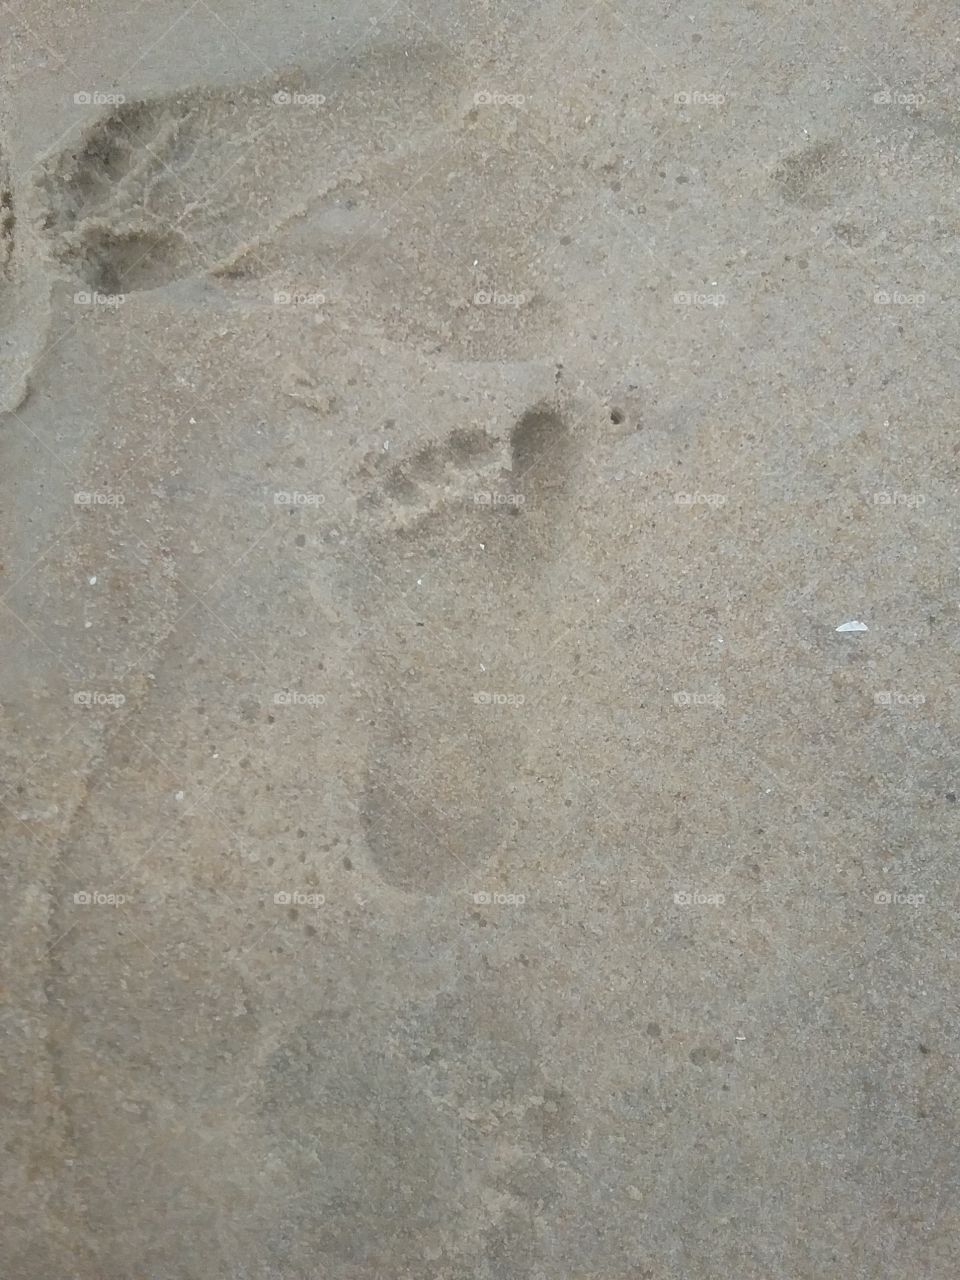 Chils Footprint in the Sand